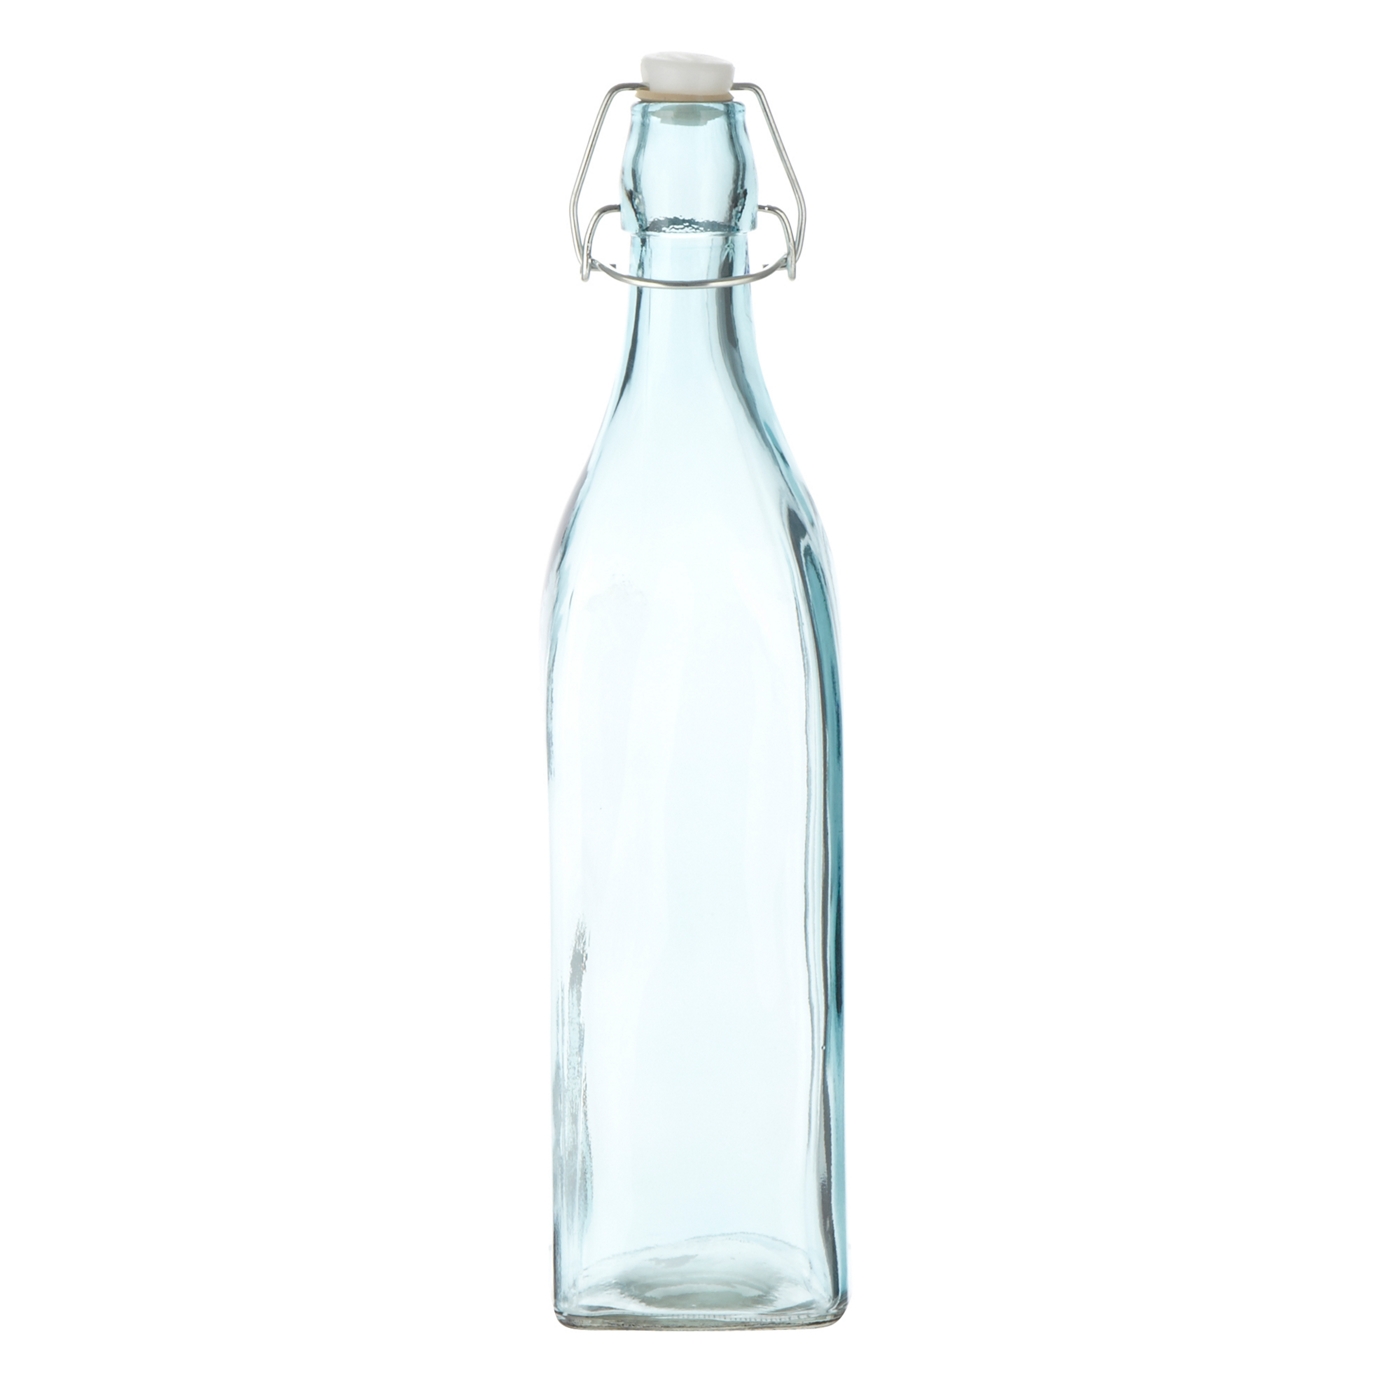 Maxwell & Williams Light grey square glass bottle